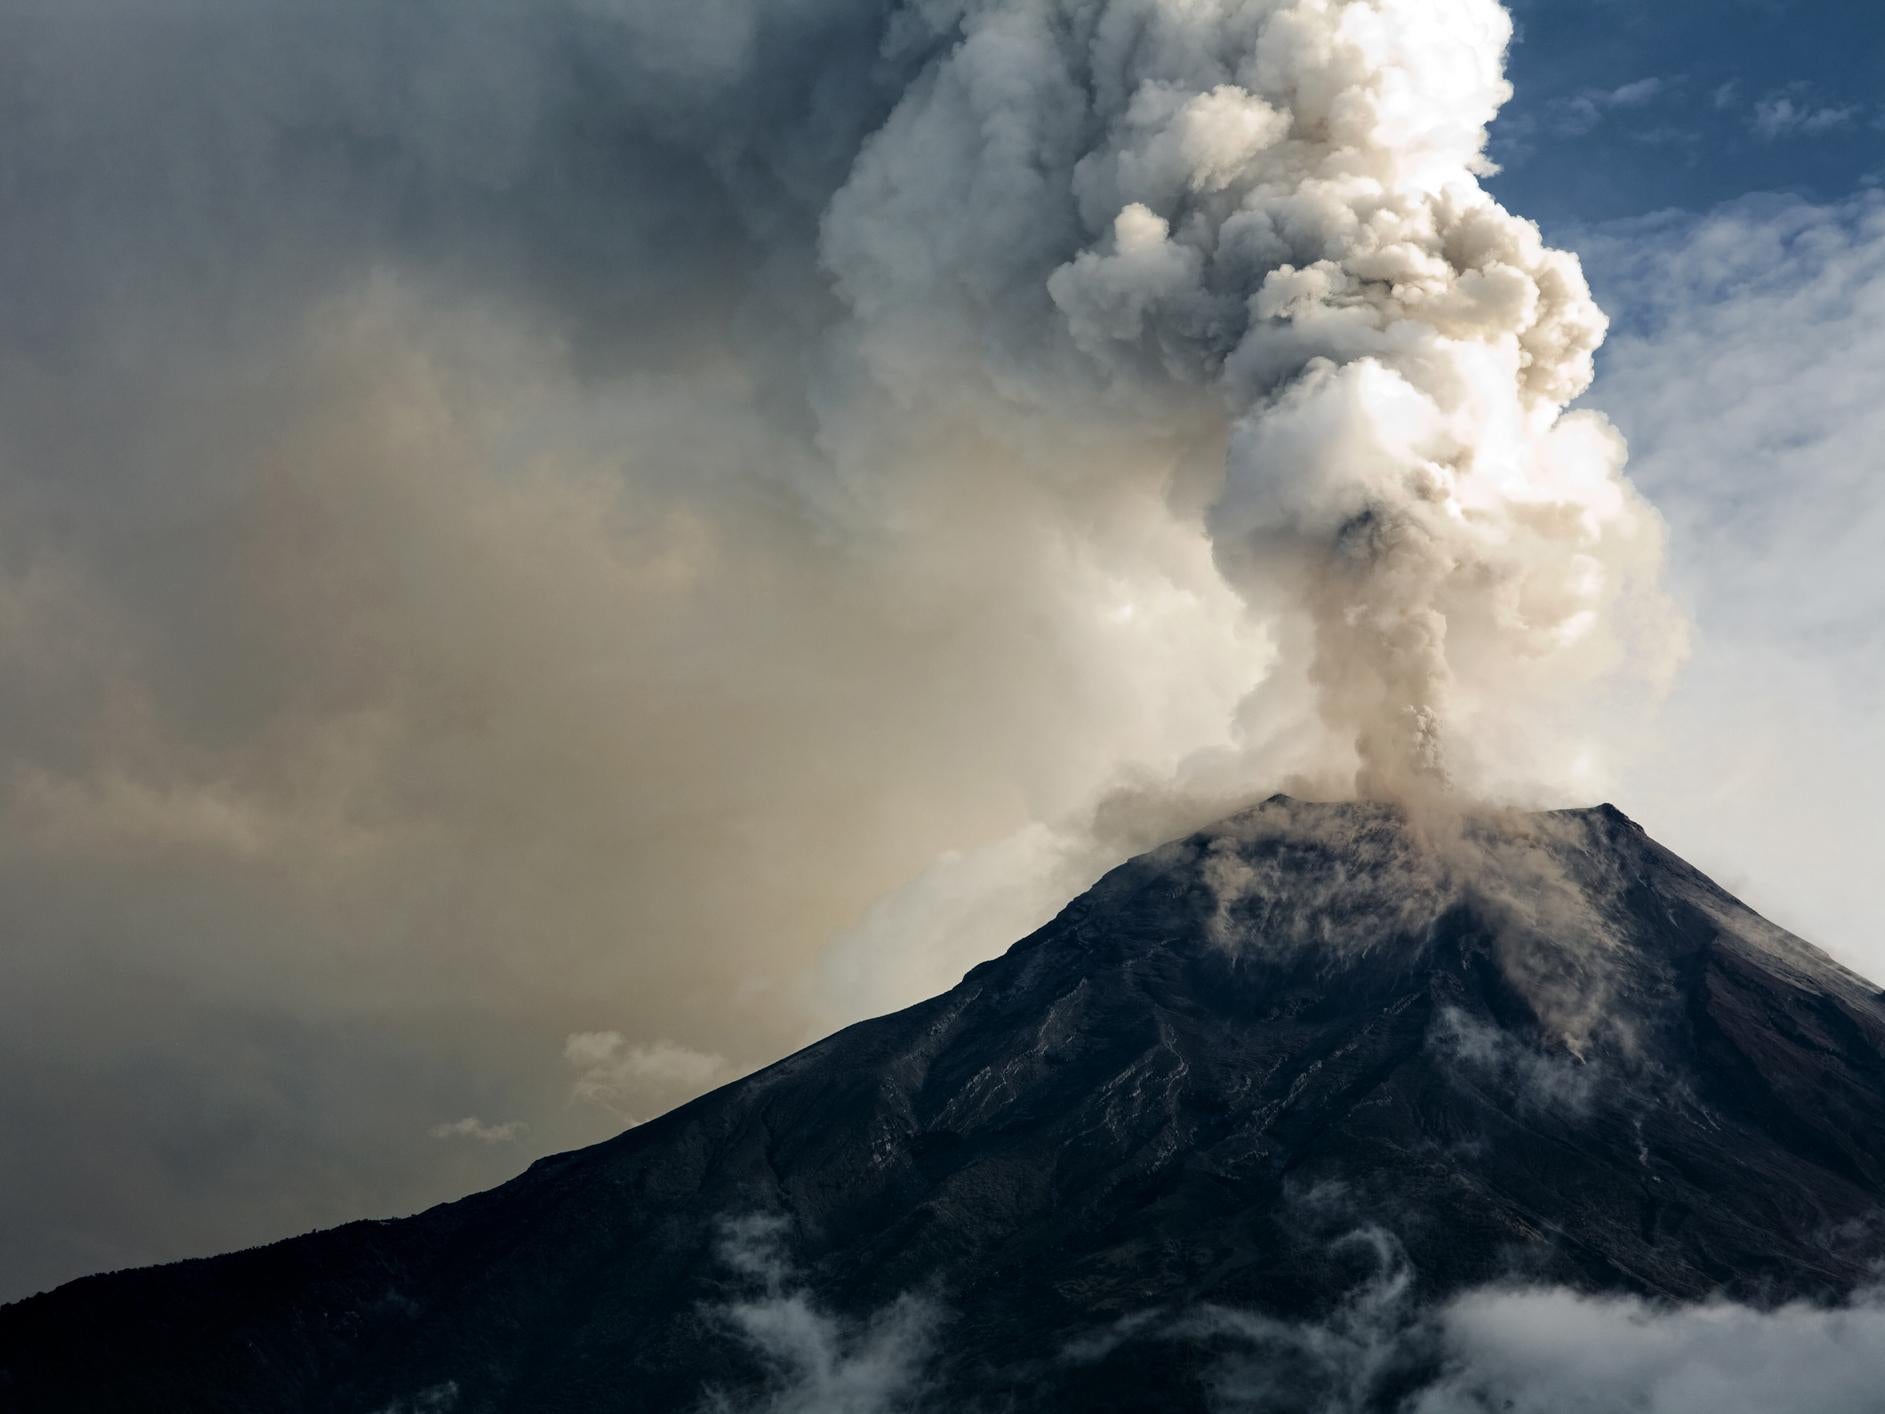 Volcanoes have the capacity to initiate devastating climate change, a threat that our ancestors have survived more than once